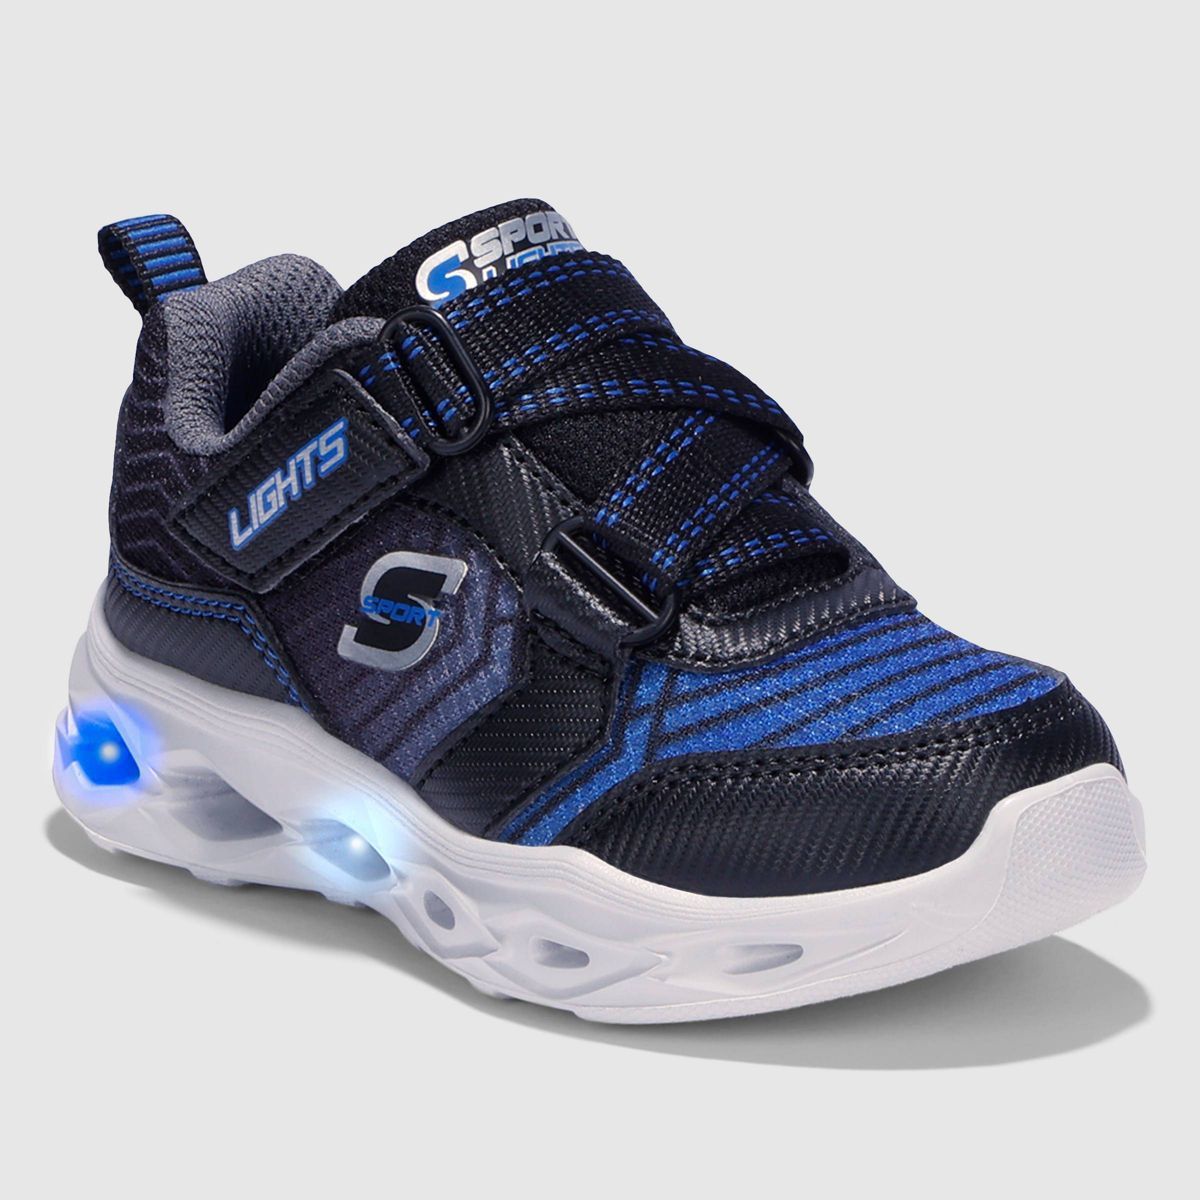 S Sport by Skechers Toddler Boys' Craig Light-Up Sneakers - Blue | Target